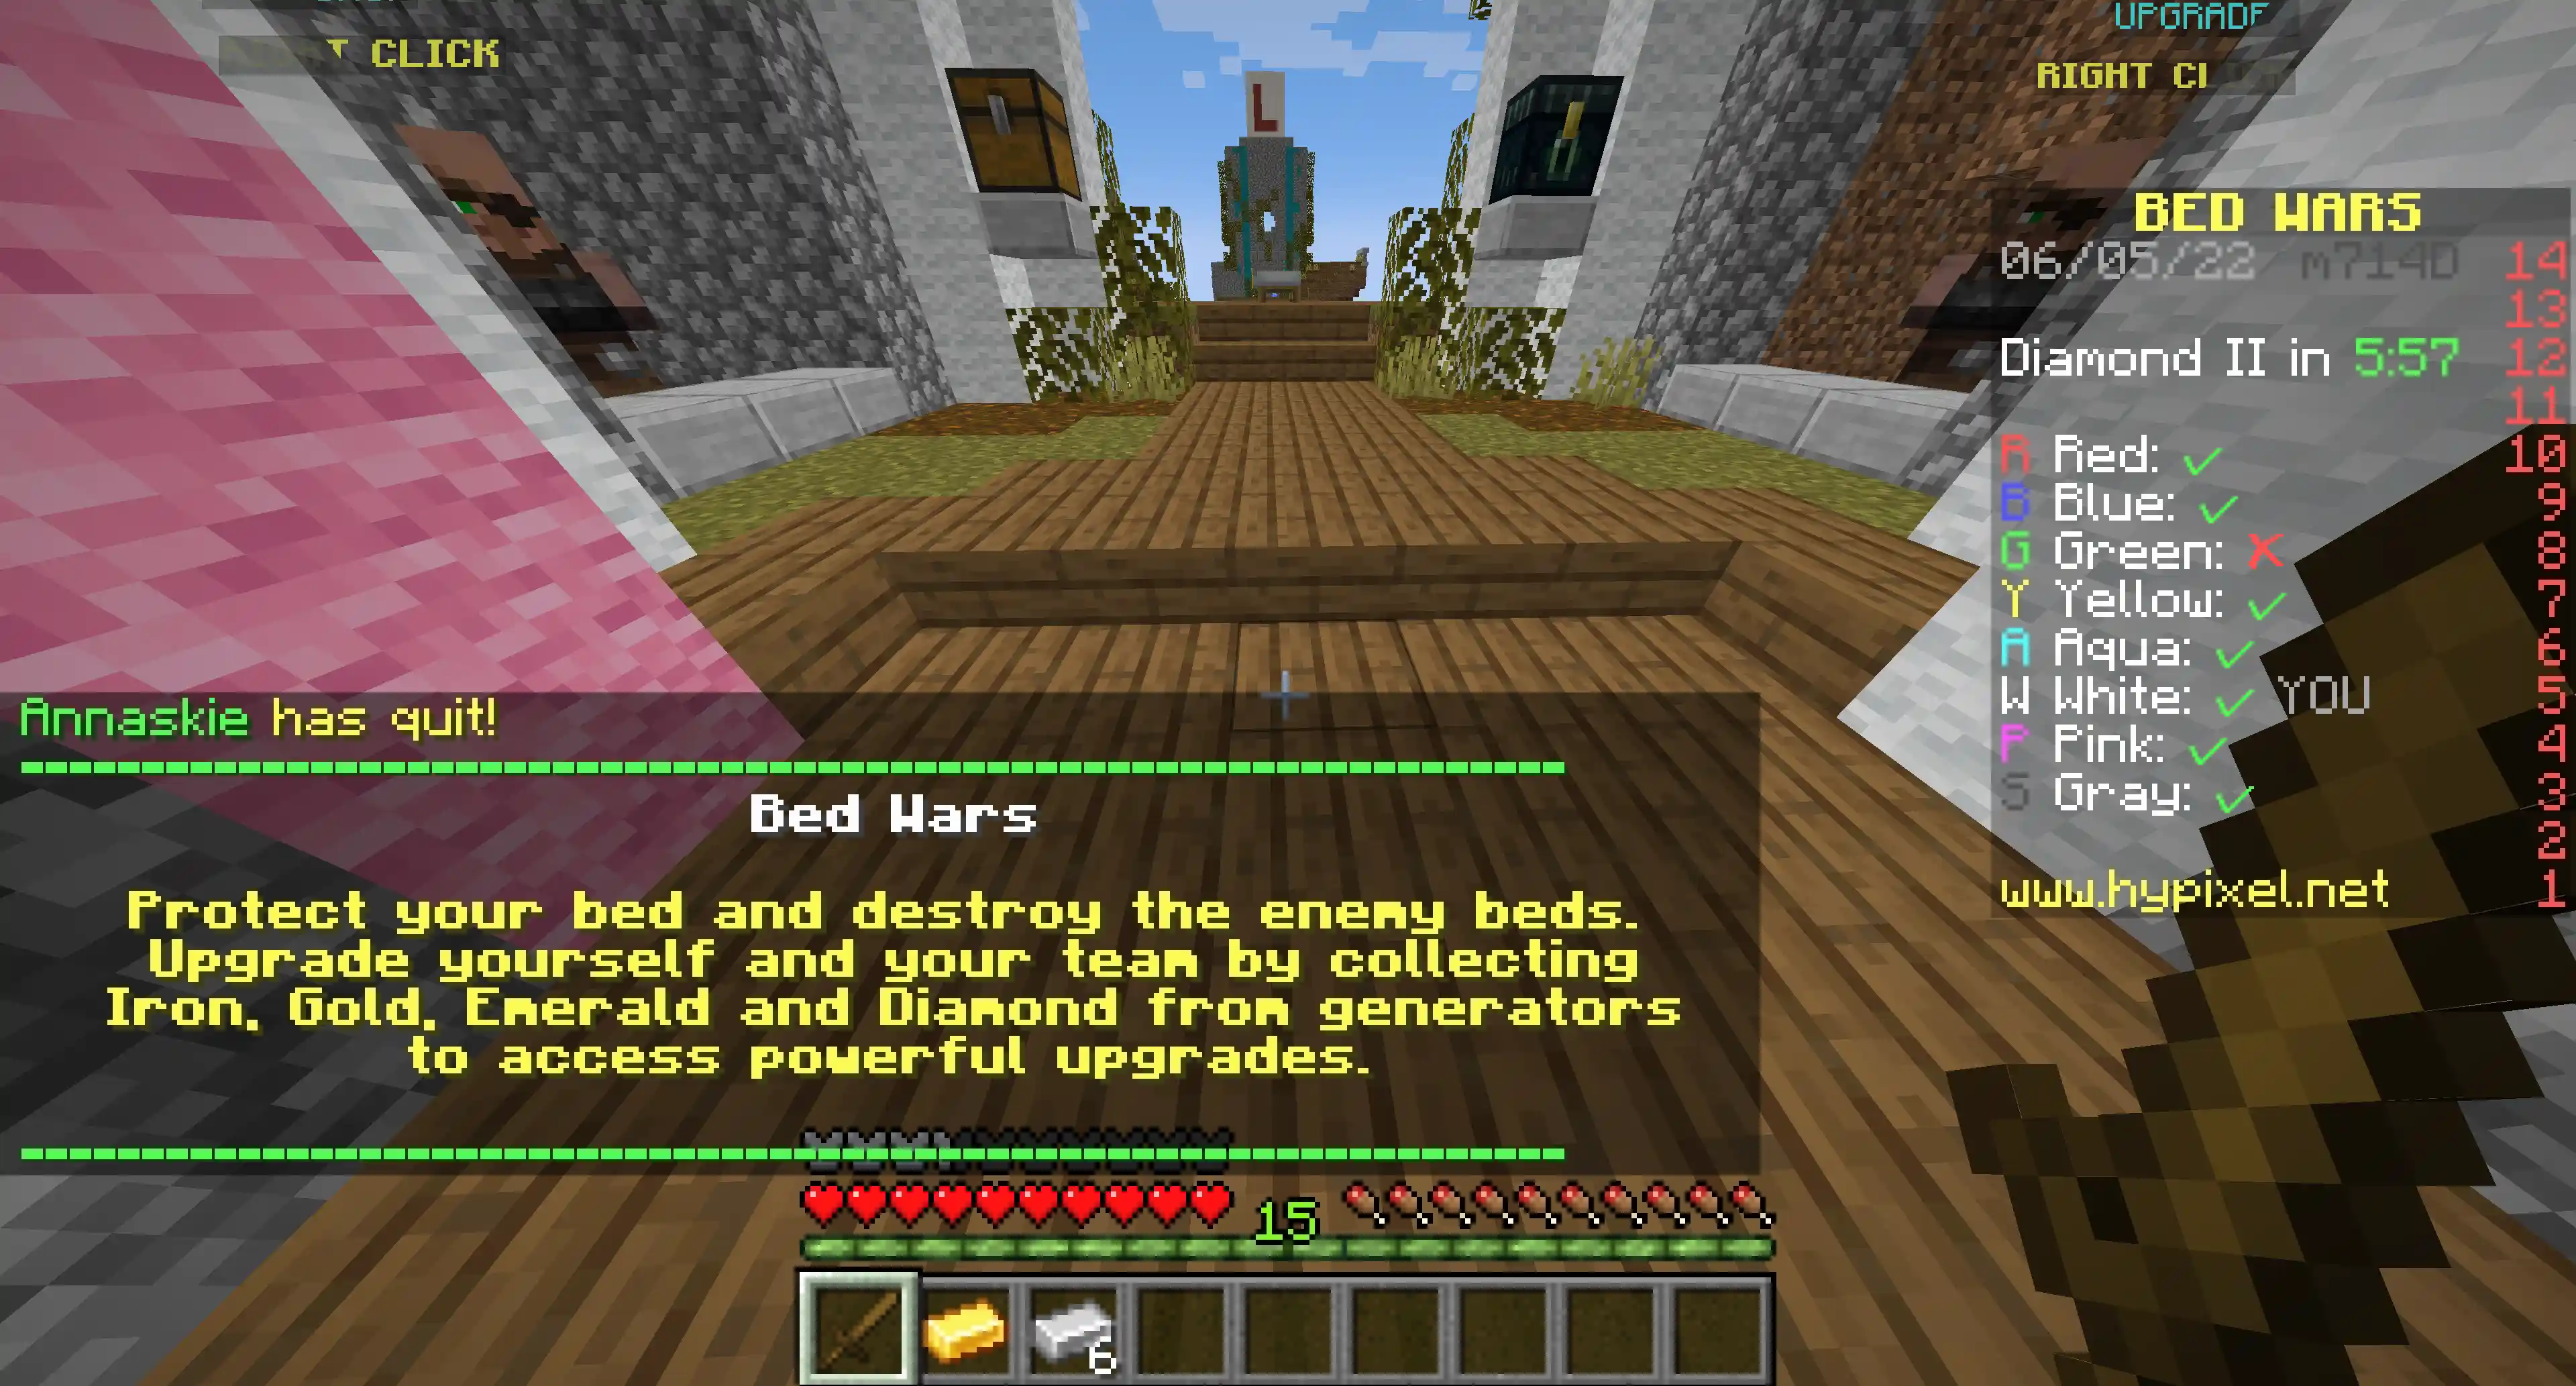 Hypixel Server Network for Minecraft - Thanks to your feedback, we've  decided to add Bed Wars as a full minigame! You can try it out now as well  as 1v1 Duels and